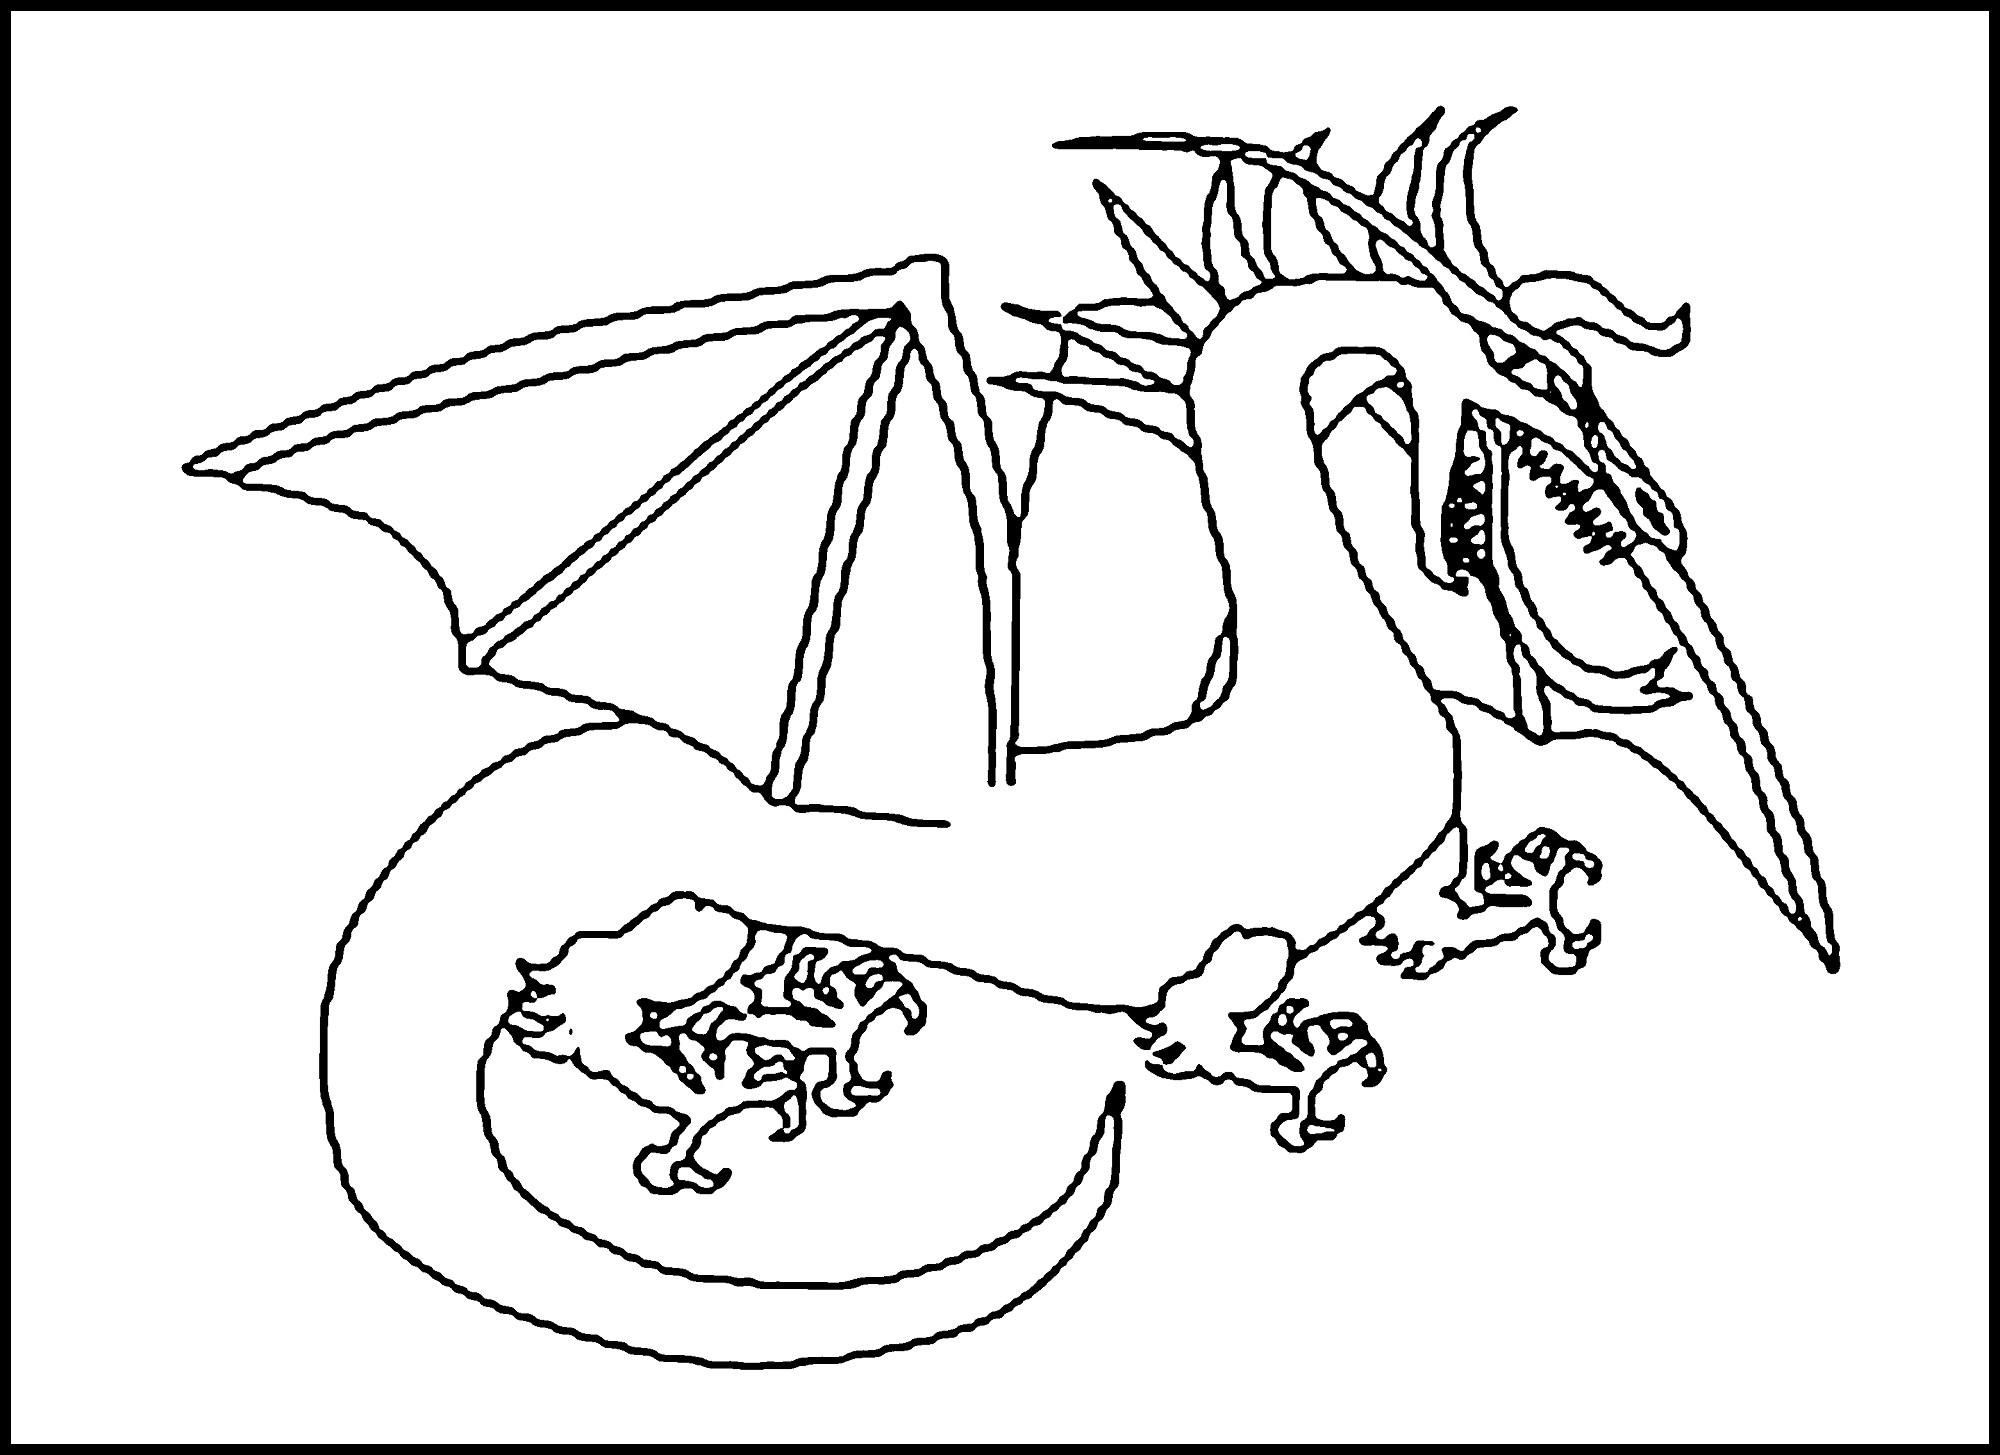 Printable Dragon Coloring Pages
 Dragon Coloring Pages Printable